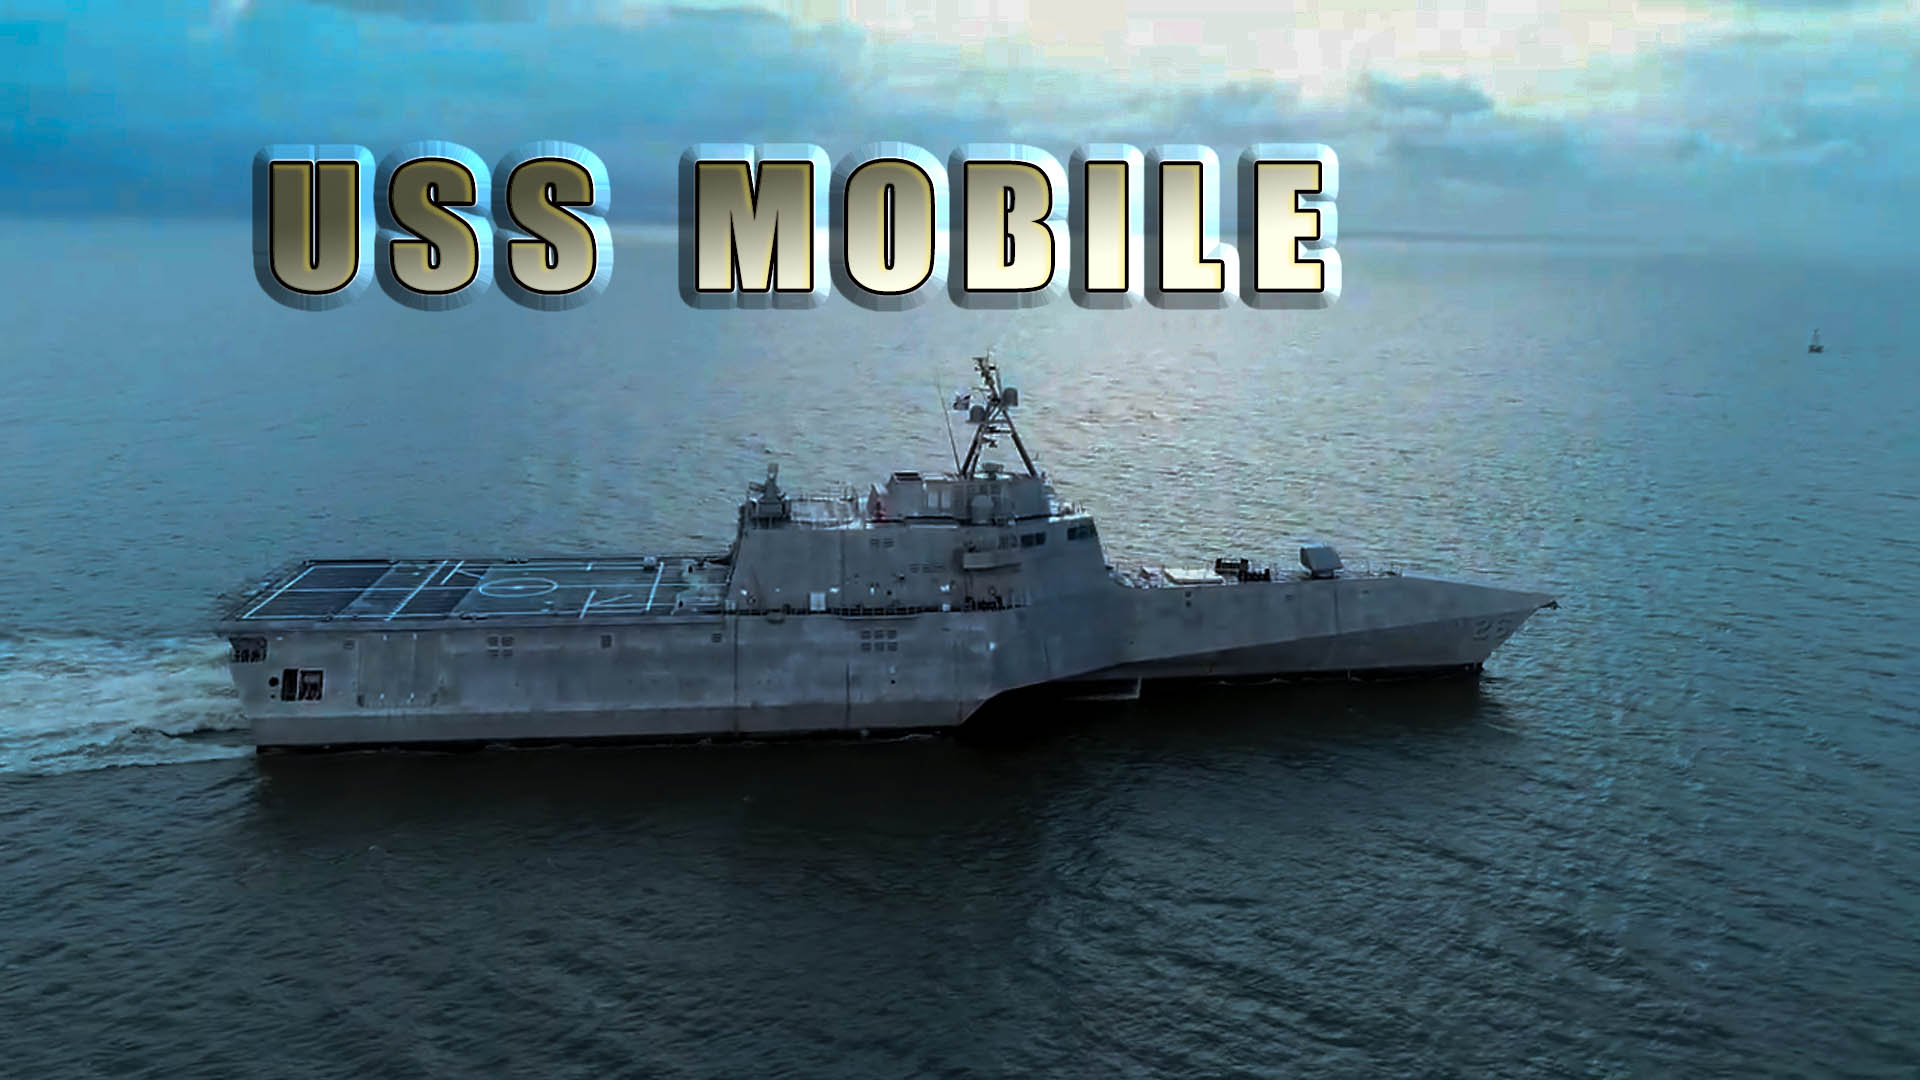 USS Mobile commissioning